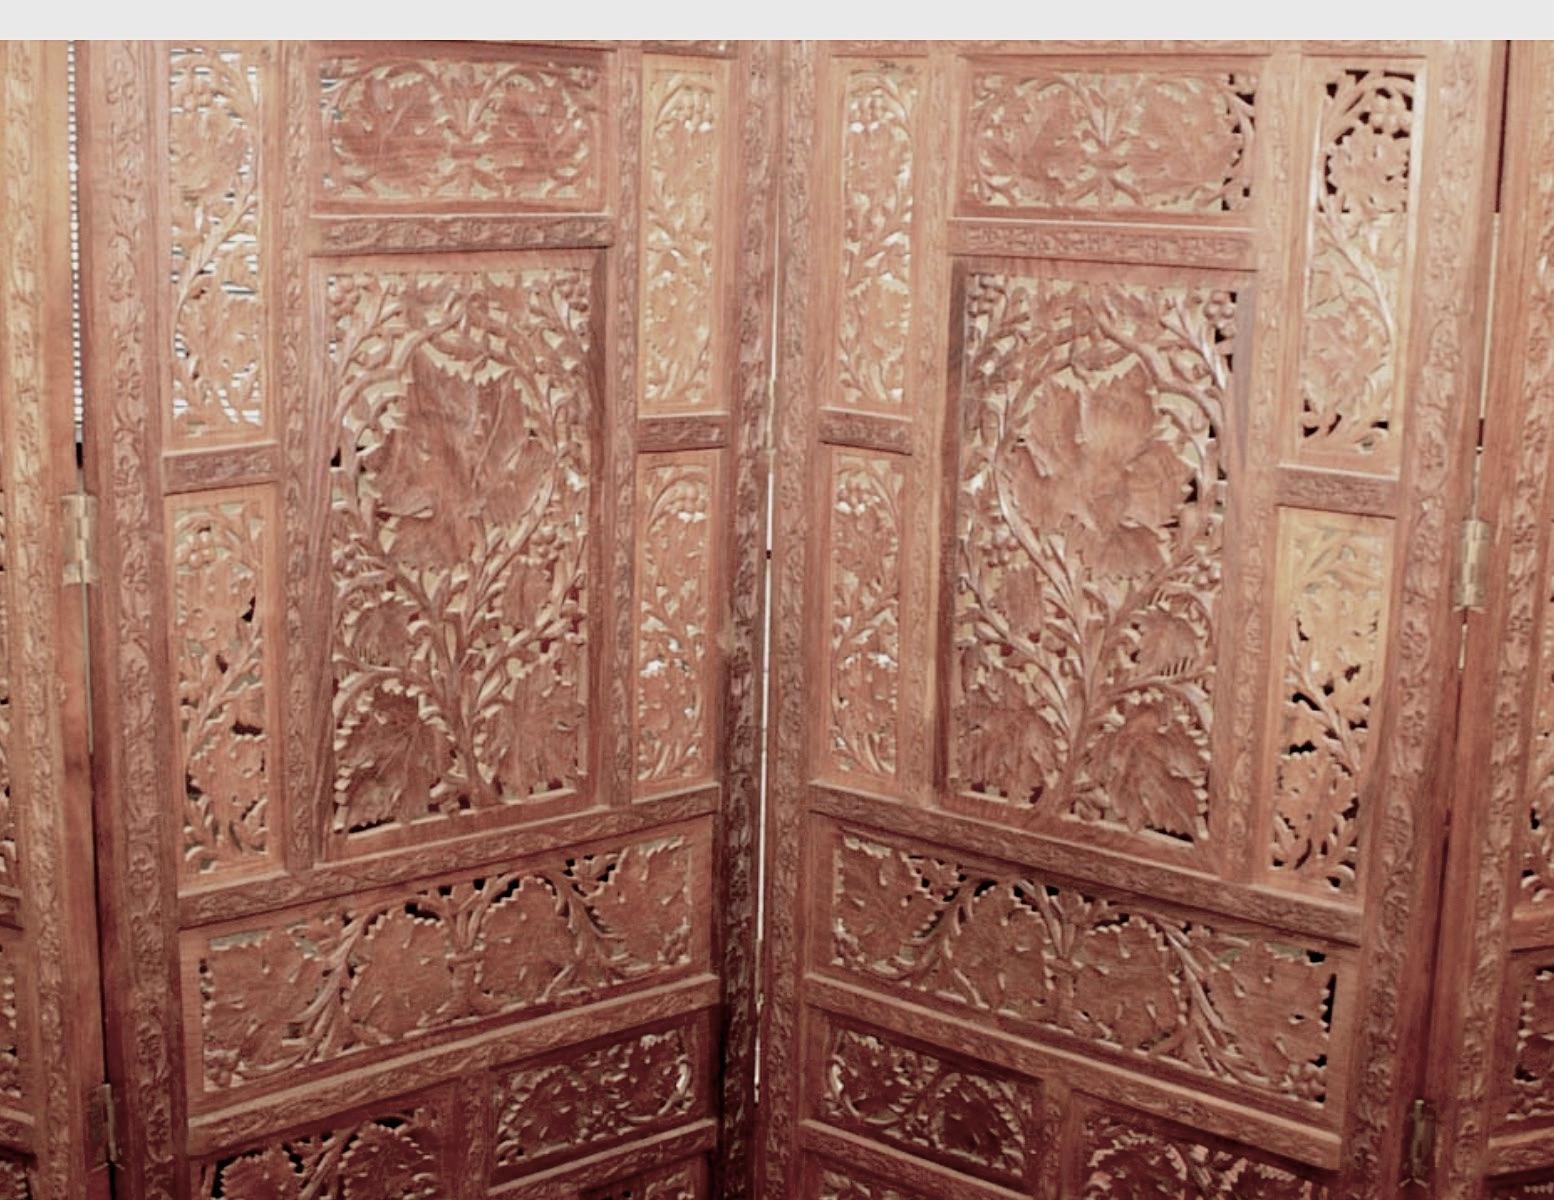 A lovely Anglo Indian elaborately hand carved teak wood 4 panel screen, circa 1900s.
A heavy substantial folding screen features intricate open work carved panels with an organic leaf motif. 
Fully Carved side moldings with finial style tops.
Top